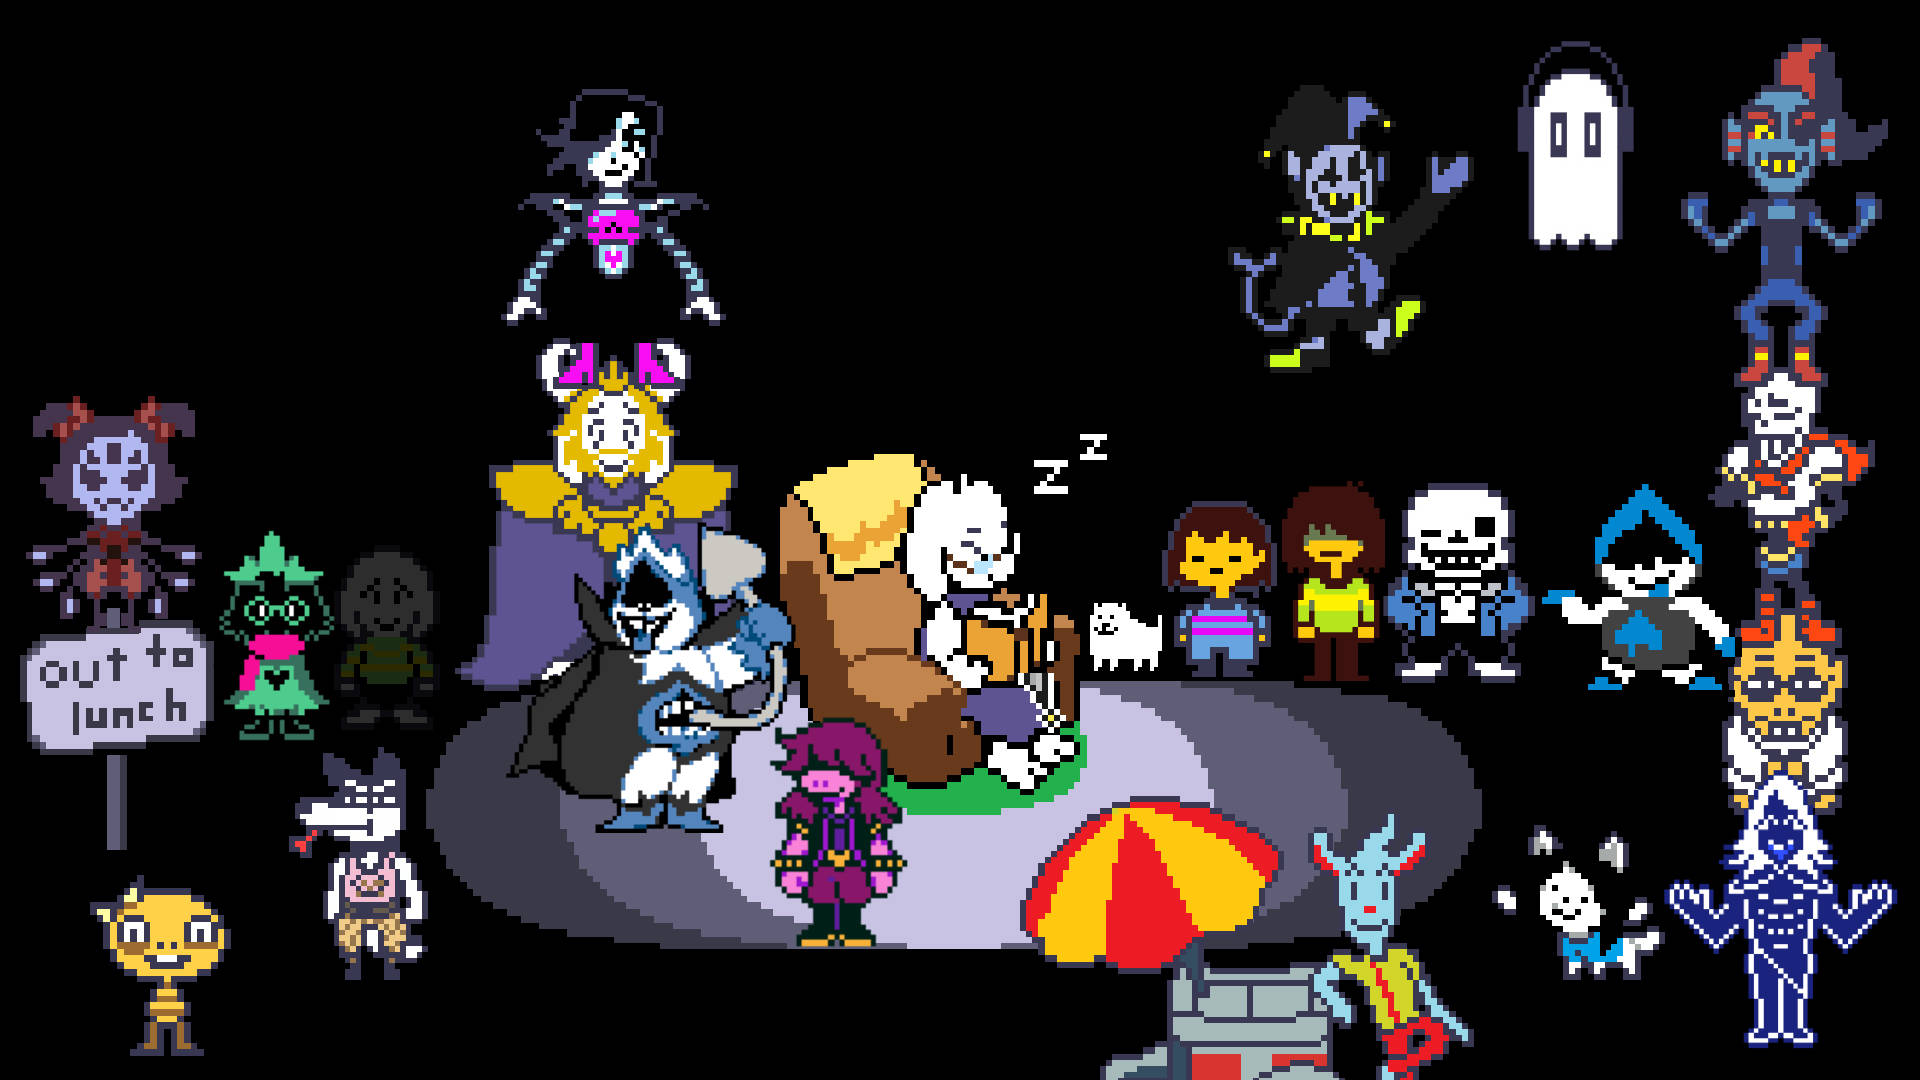 Human And Monster Friends From The Popular Game Series, Undertale And Deltarune Background